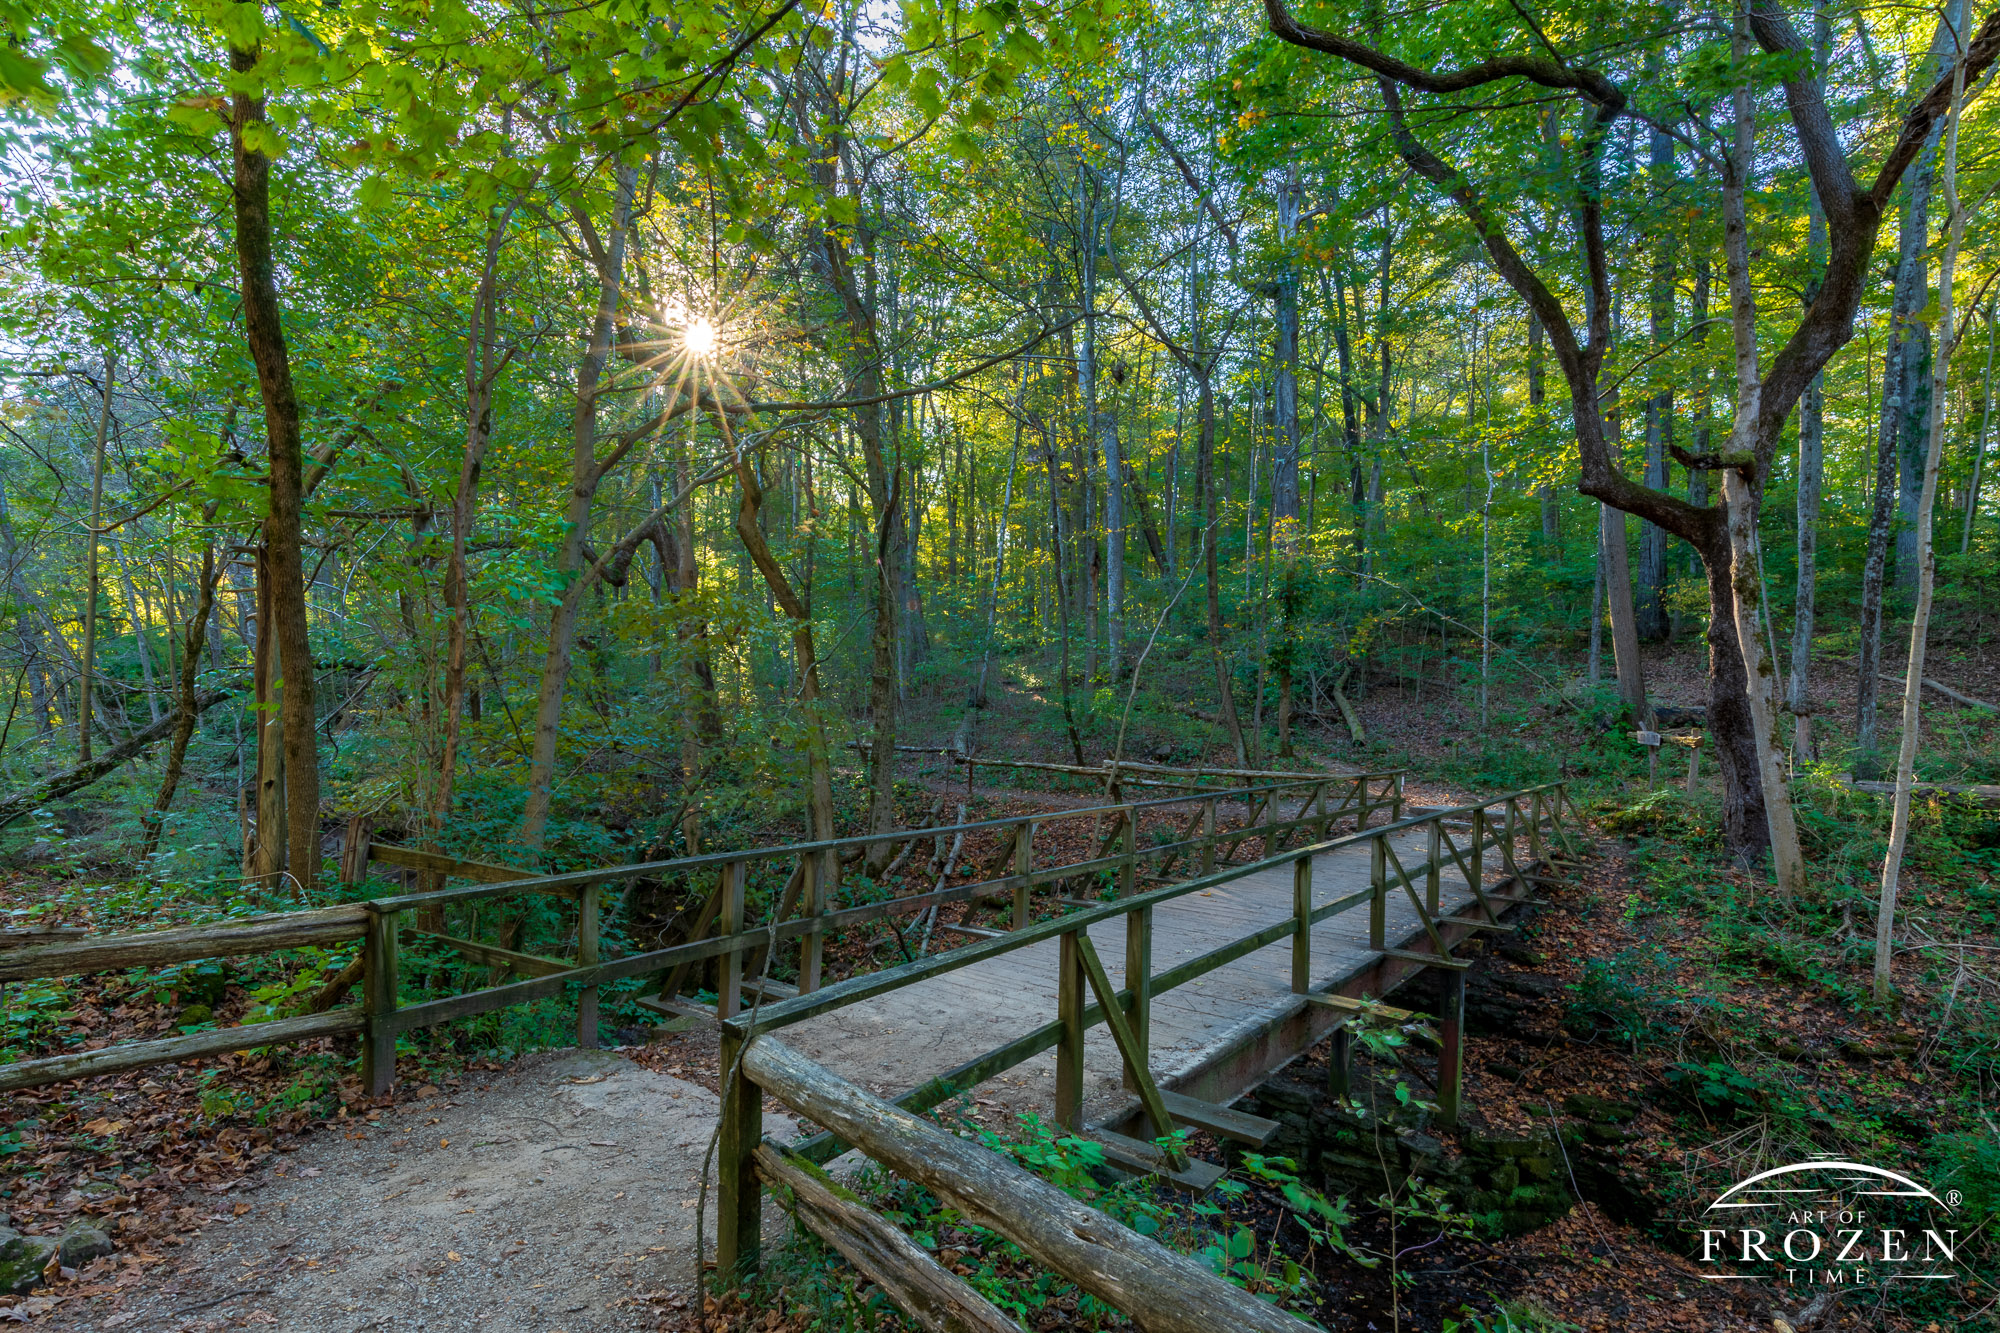 Wooden bridge spanning a creek as trees filter the golden light from the setting sun